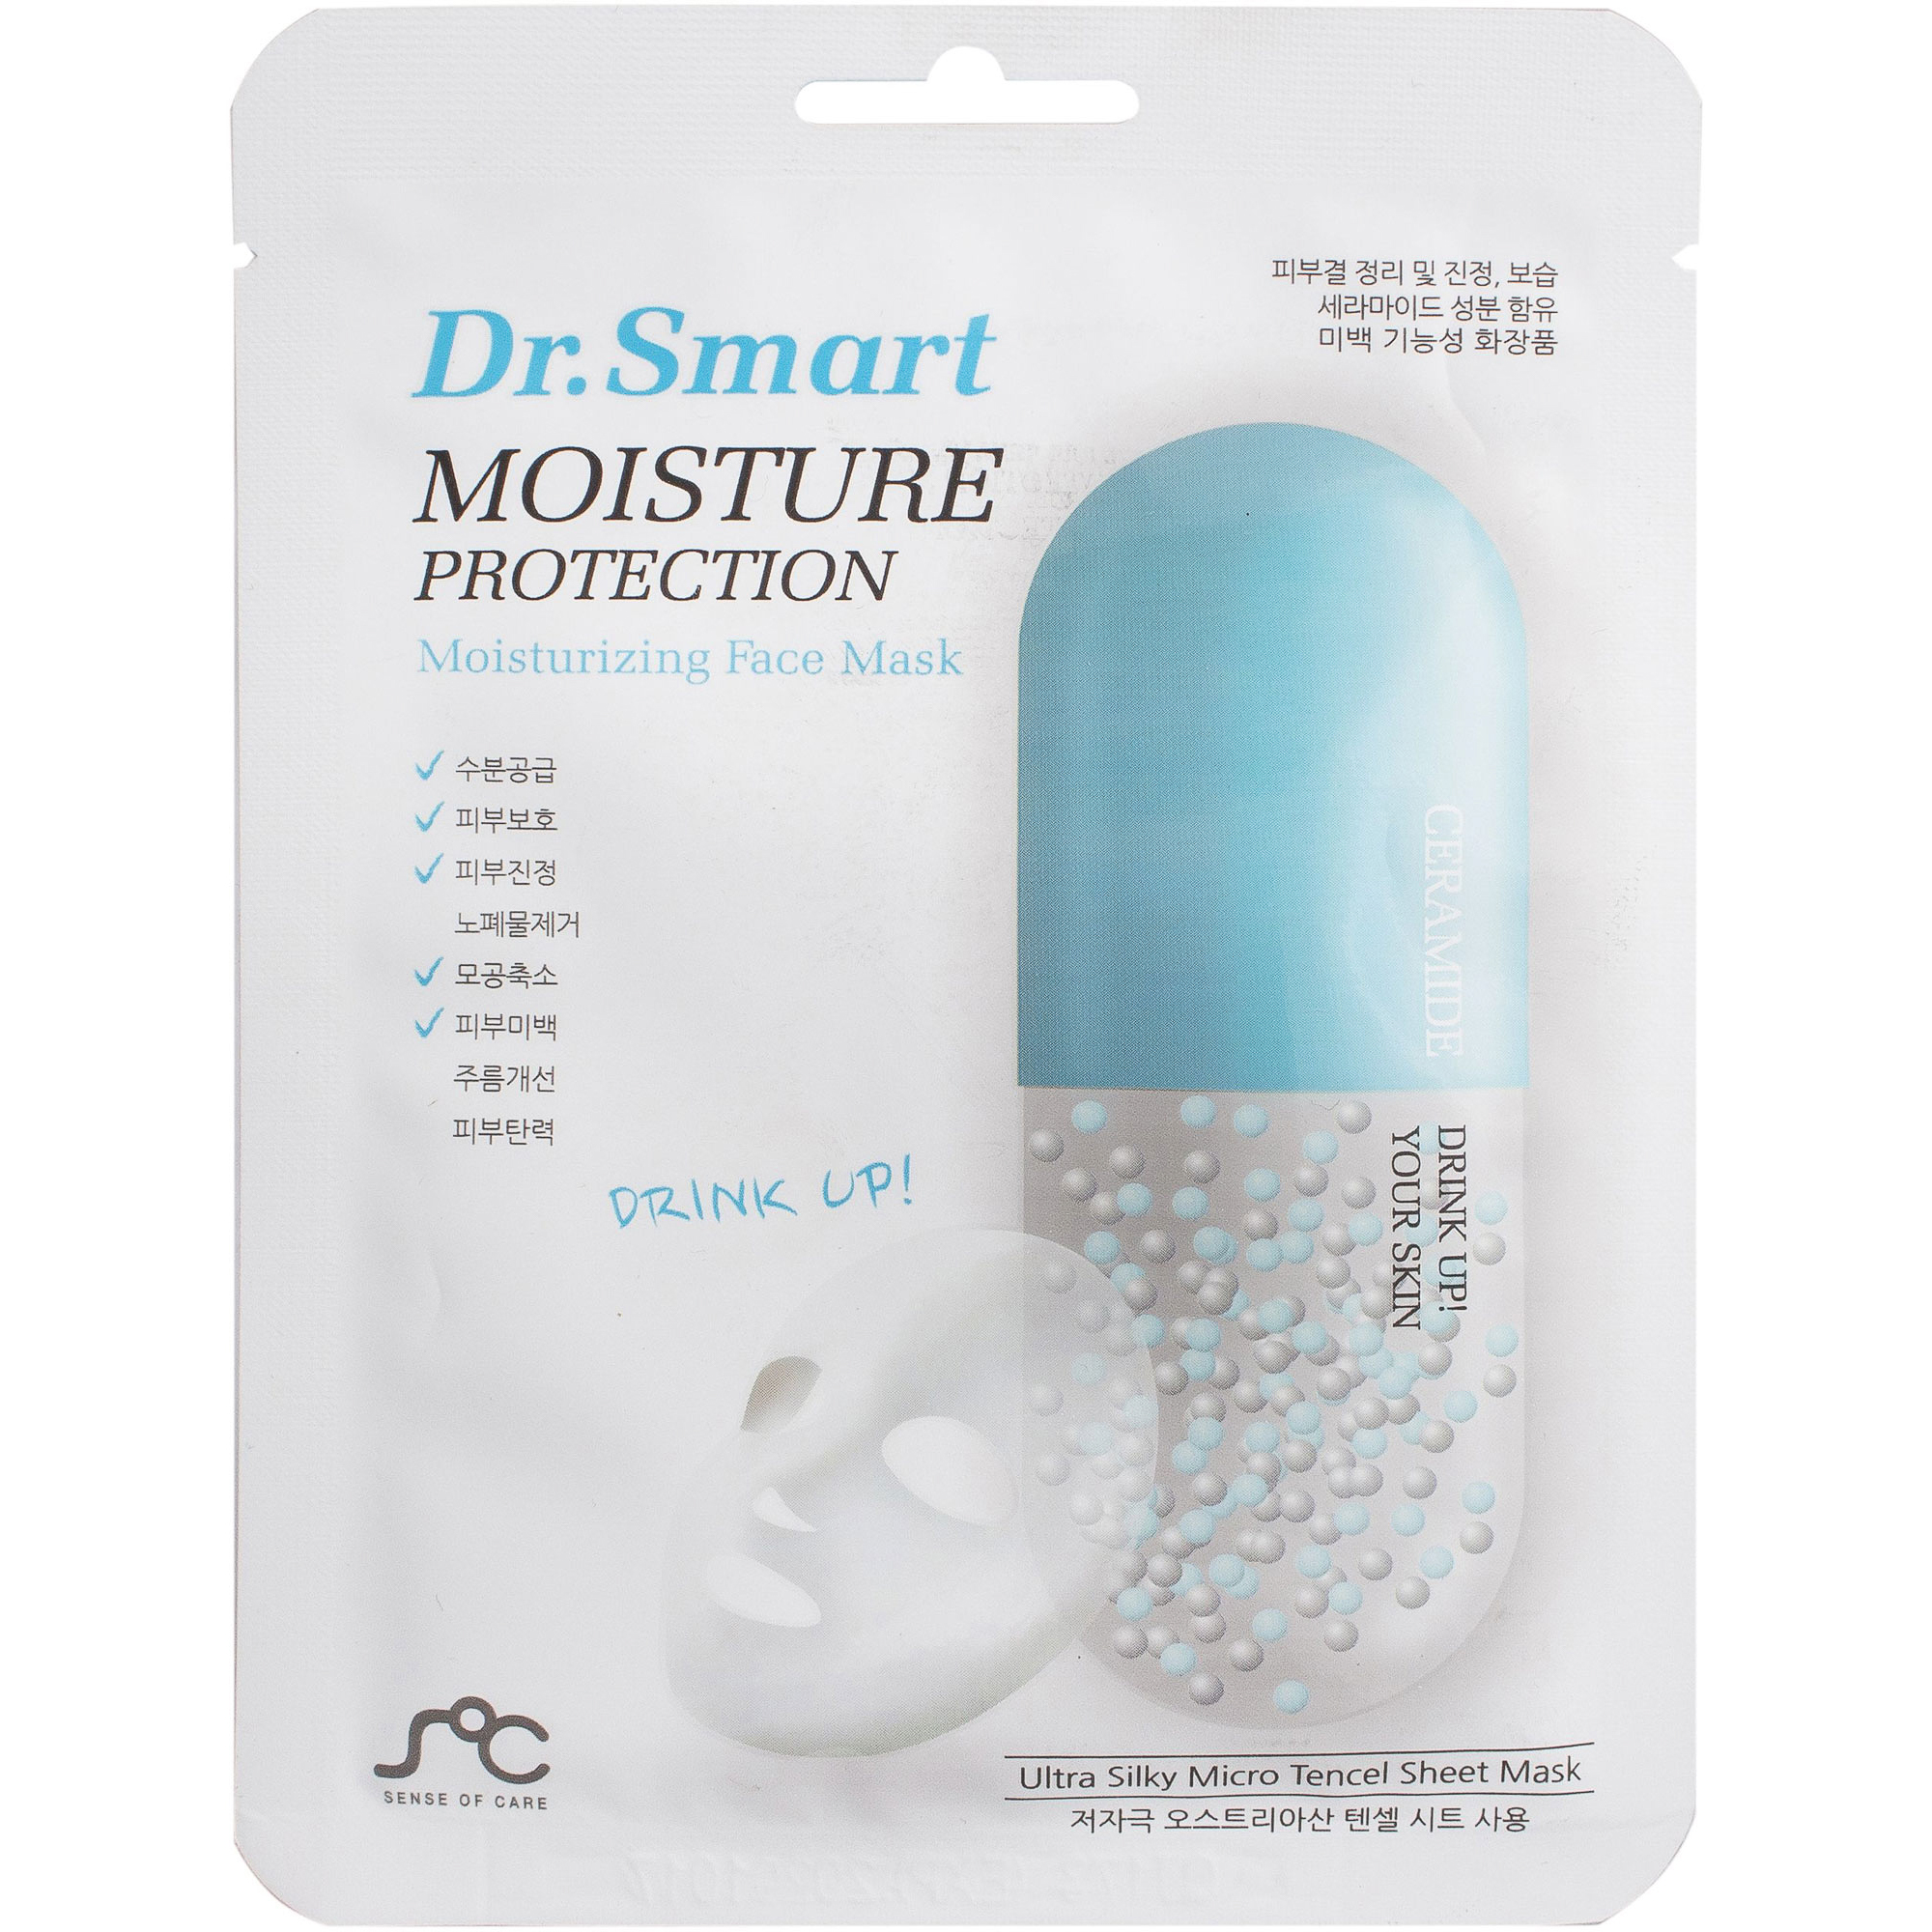 Маска для лица Dr. Smart Moisture Protection Face Mask эмульсия с spf30 для лица и тела protective lotion face and body spf30 high protection uva uvb 160242 125 мл